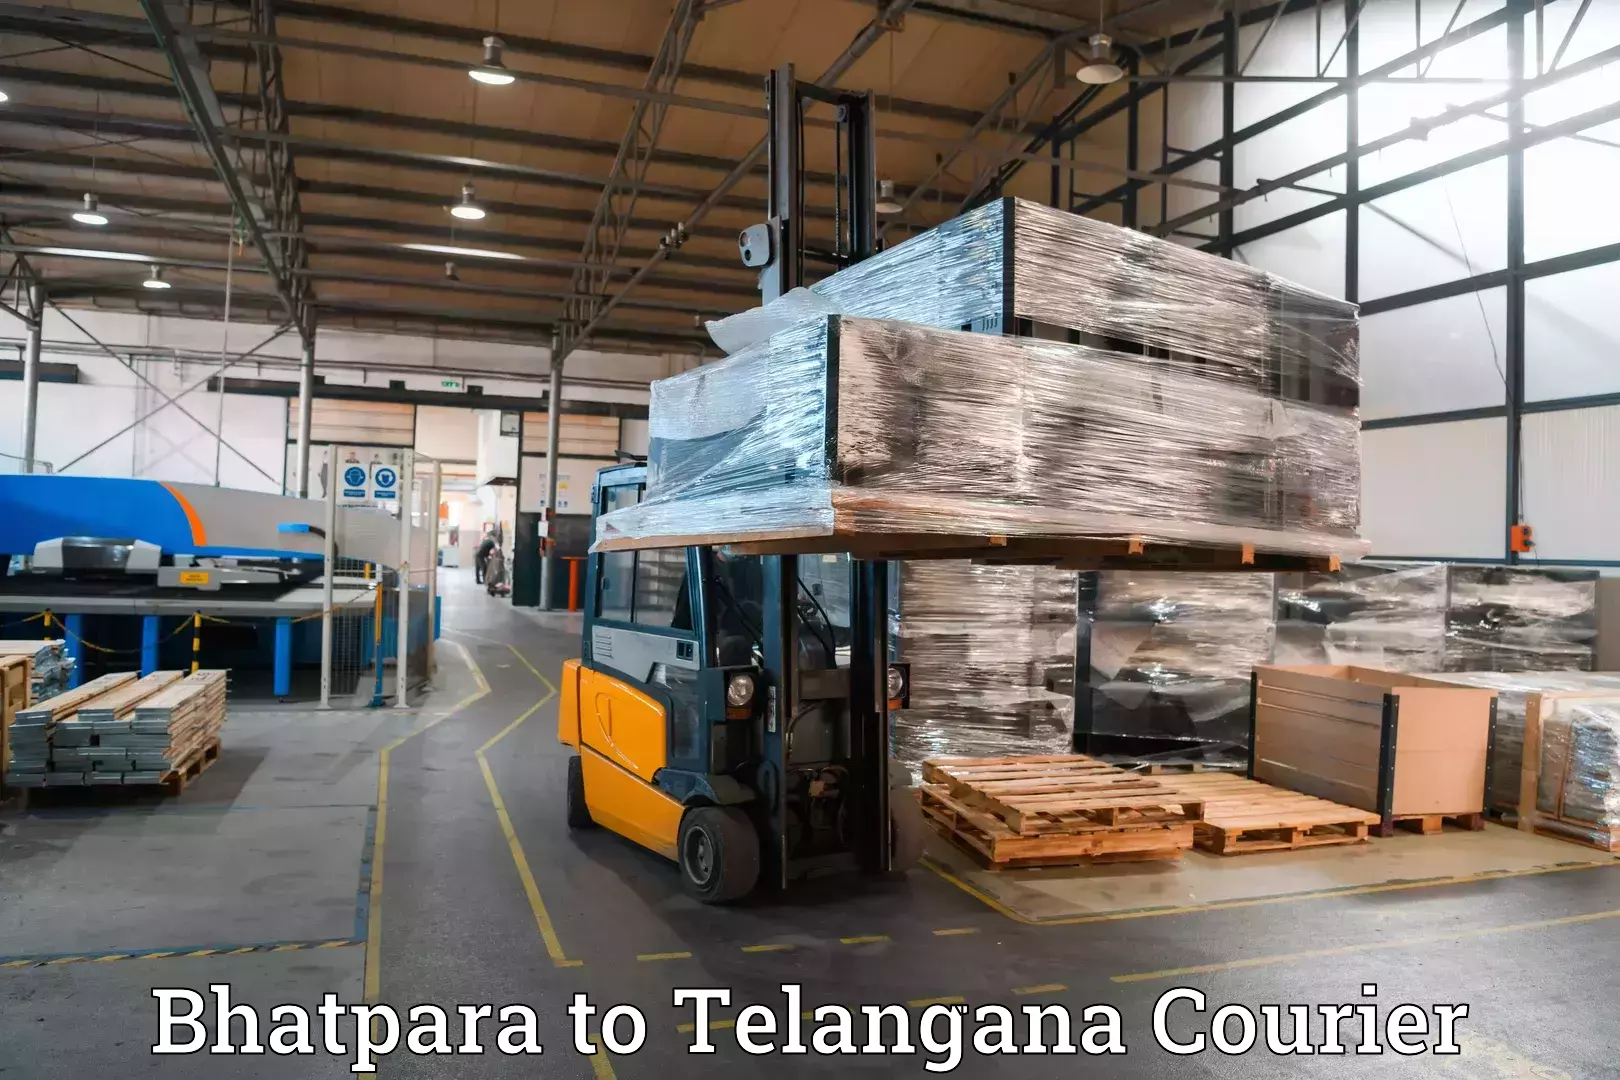 Luggage transport consultancy Bhatpara to Makthal